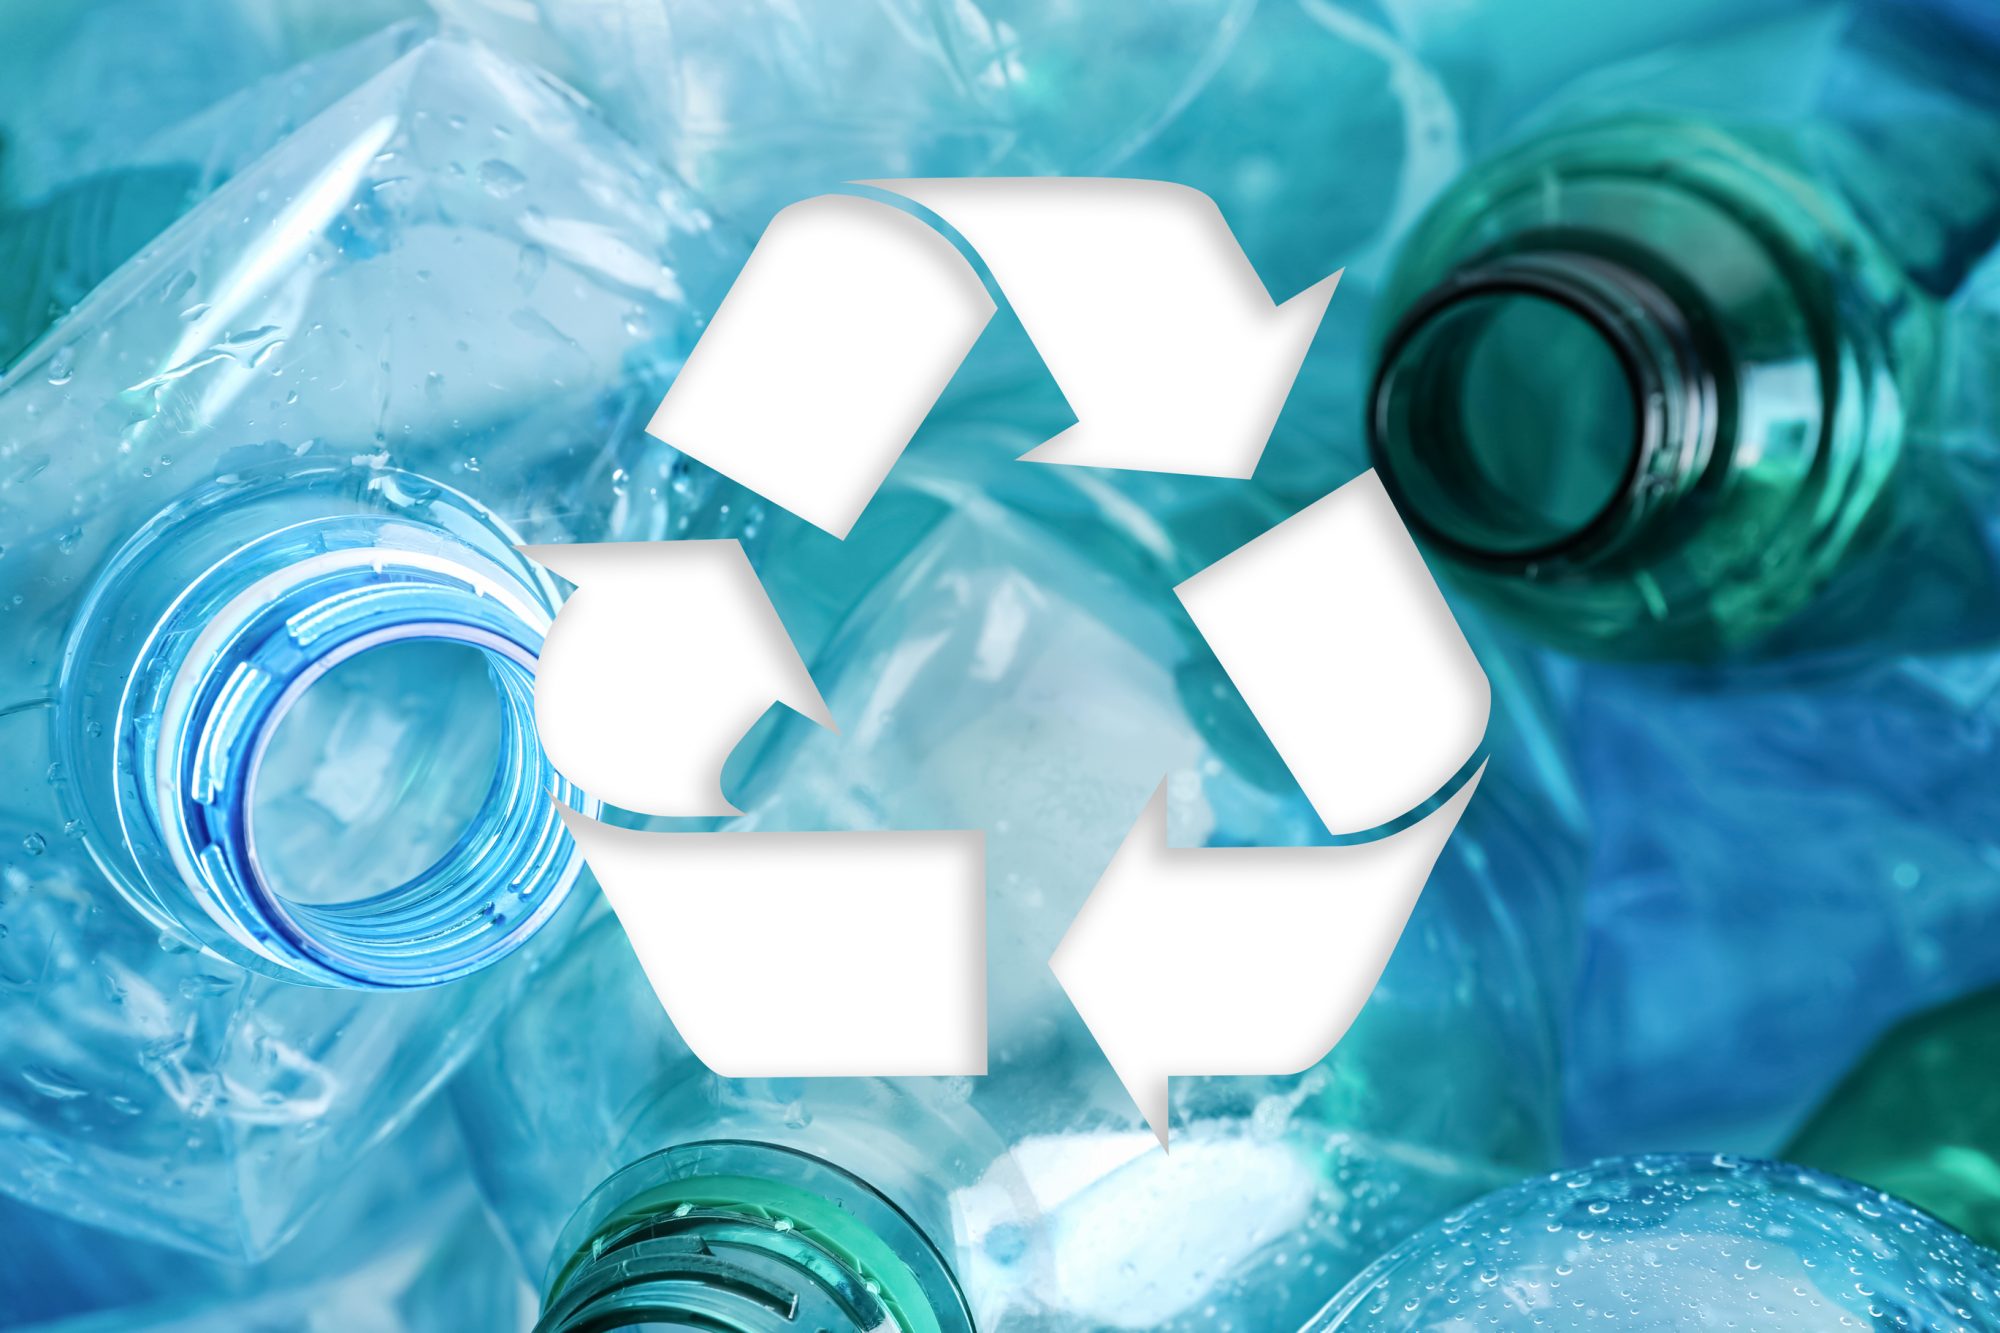 A Vicious Cycle of Self-Deception. Why the Plastic Recycling Technology is the Problem but Not the Solution?